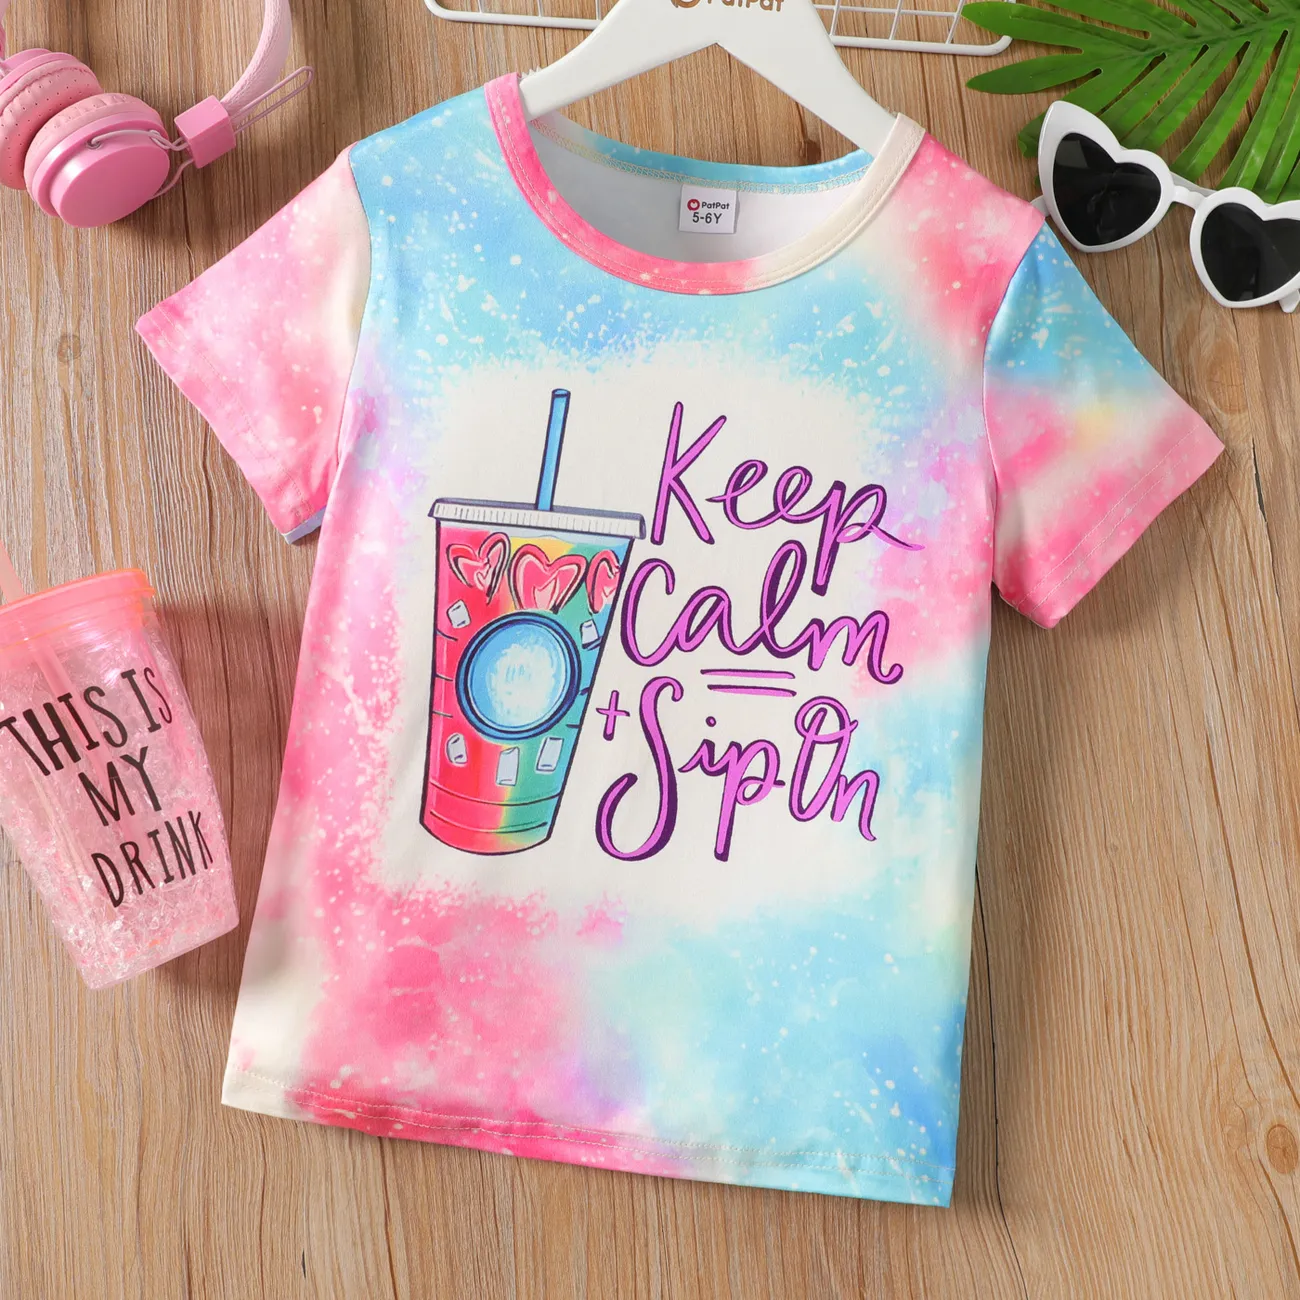 Kid Girl Sippy Cup & Letter Print Short-sleeve Tee  big image 1